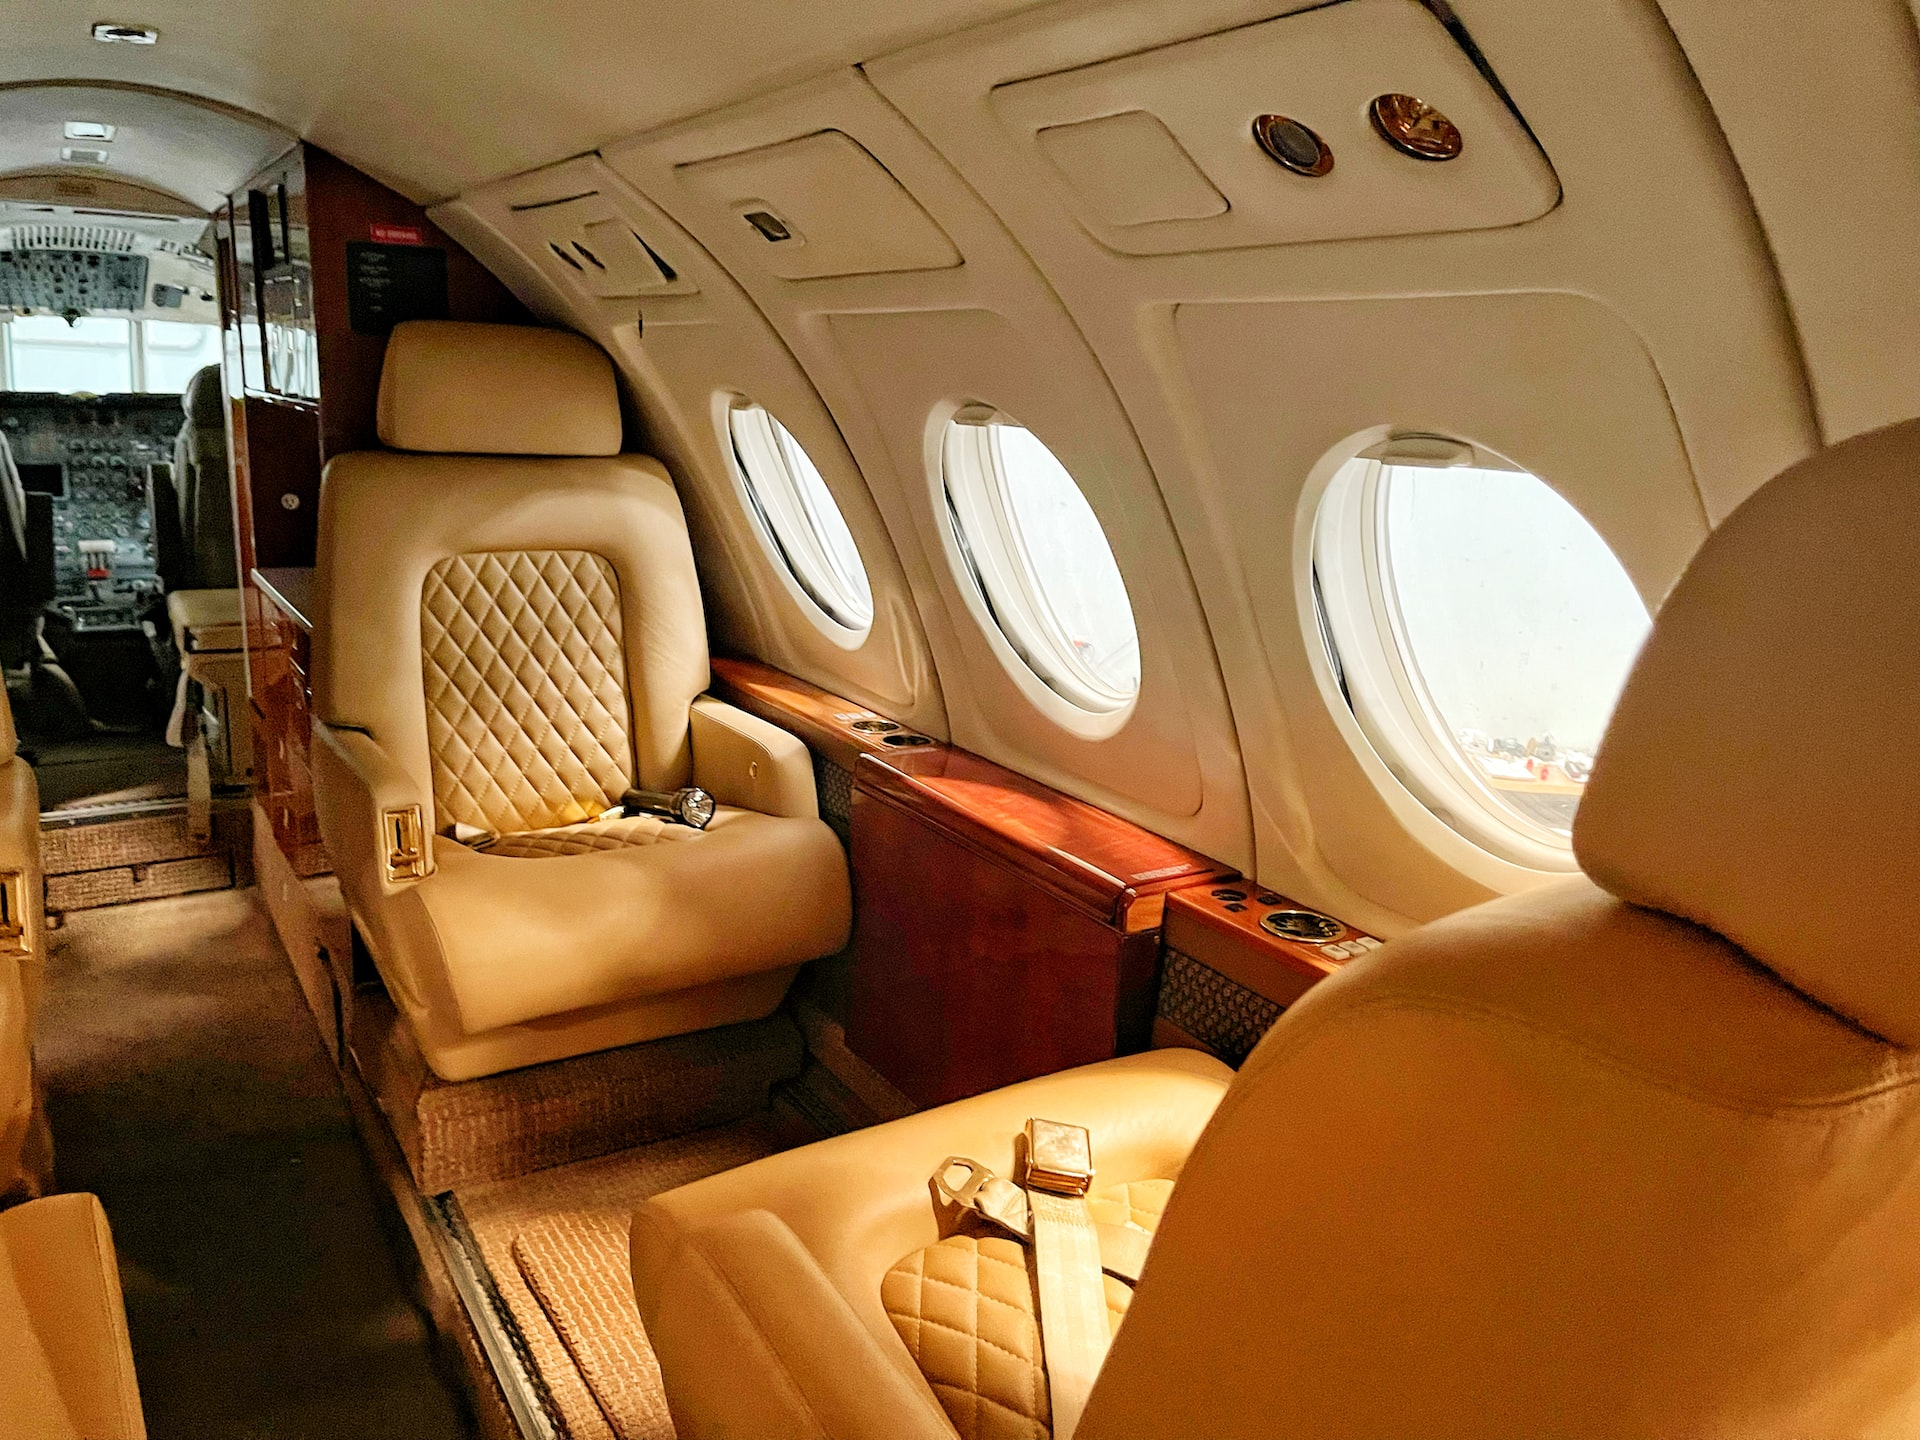 The interior of a private jet.